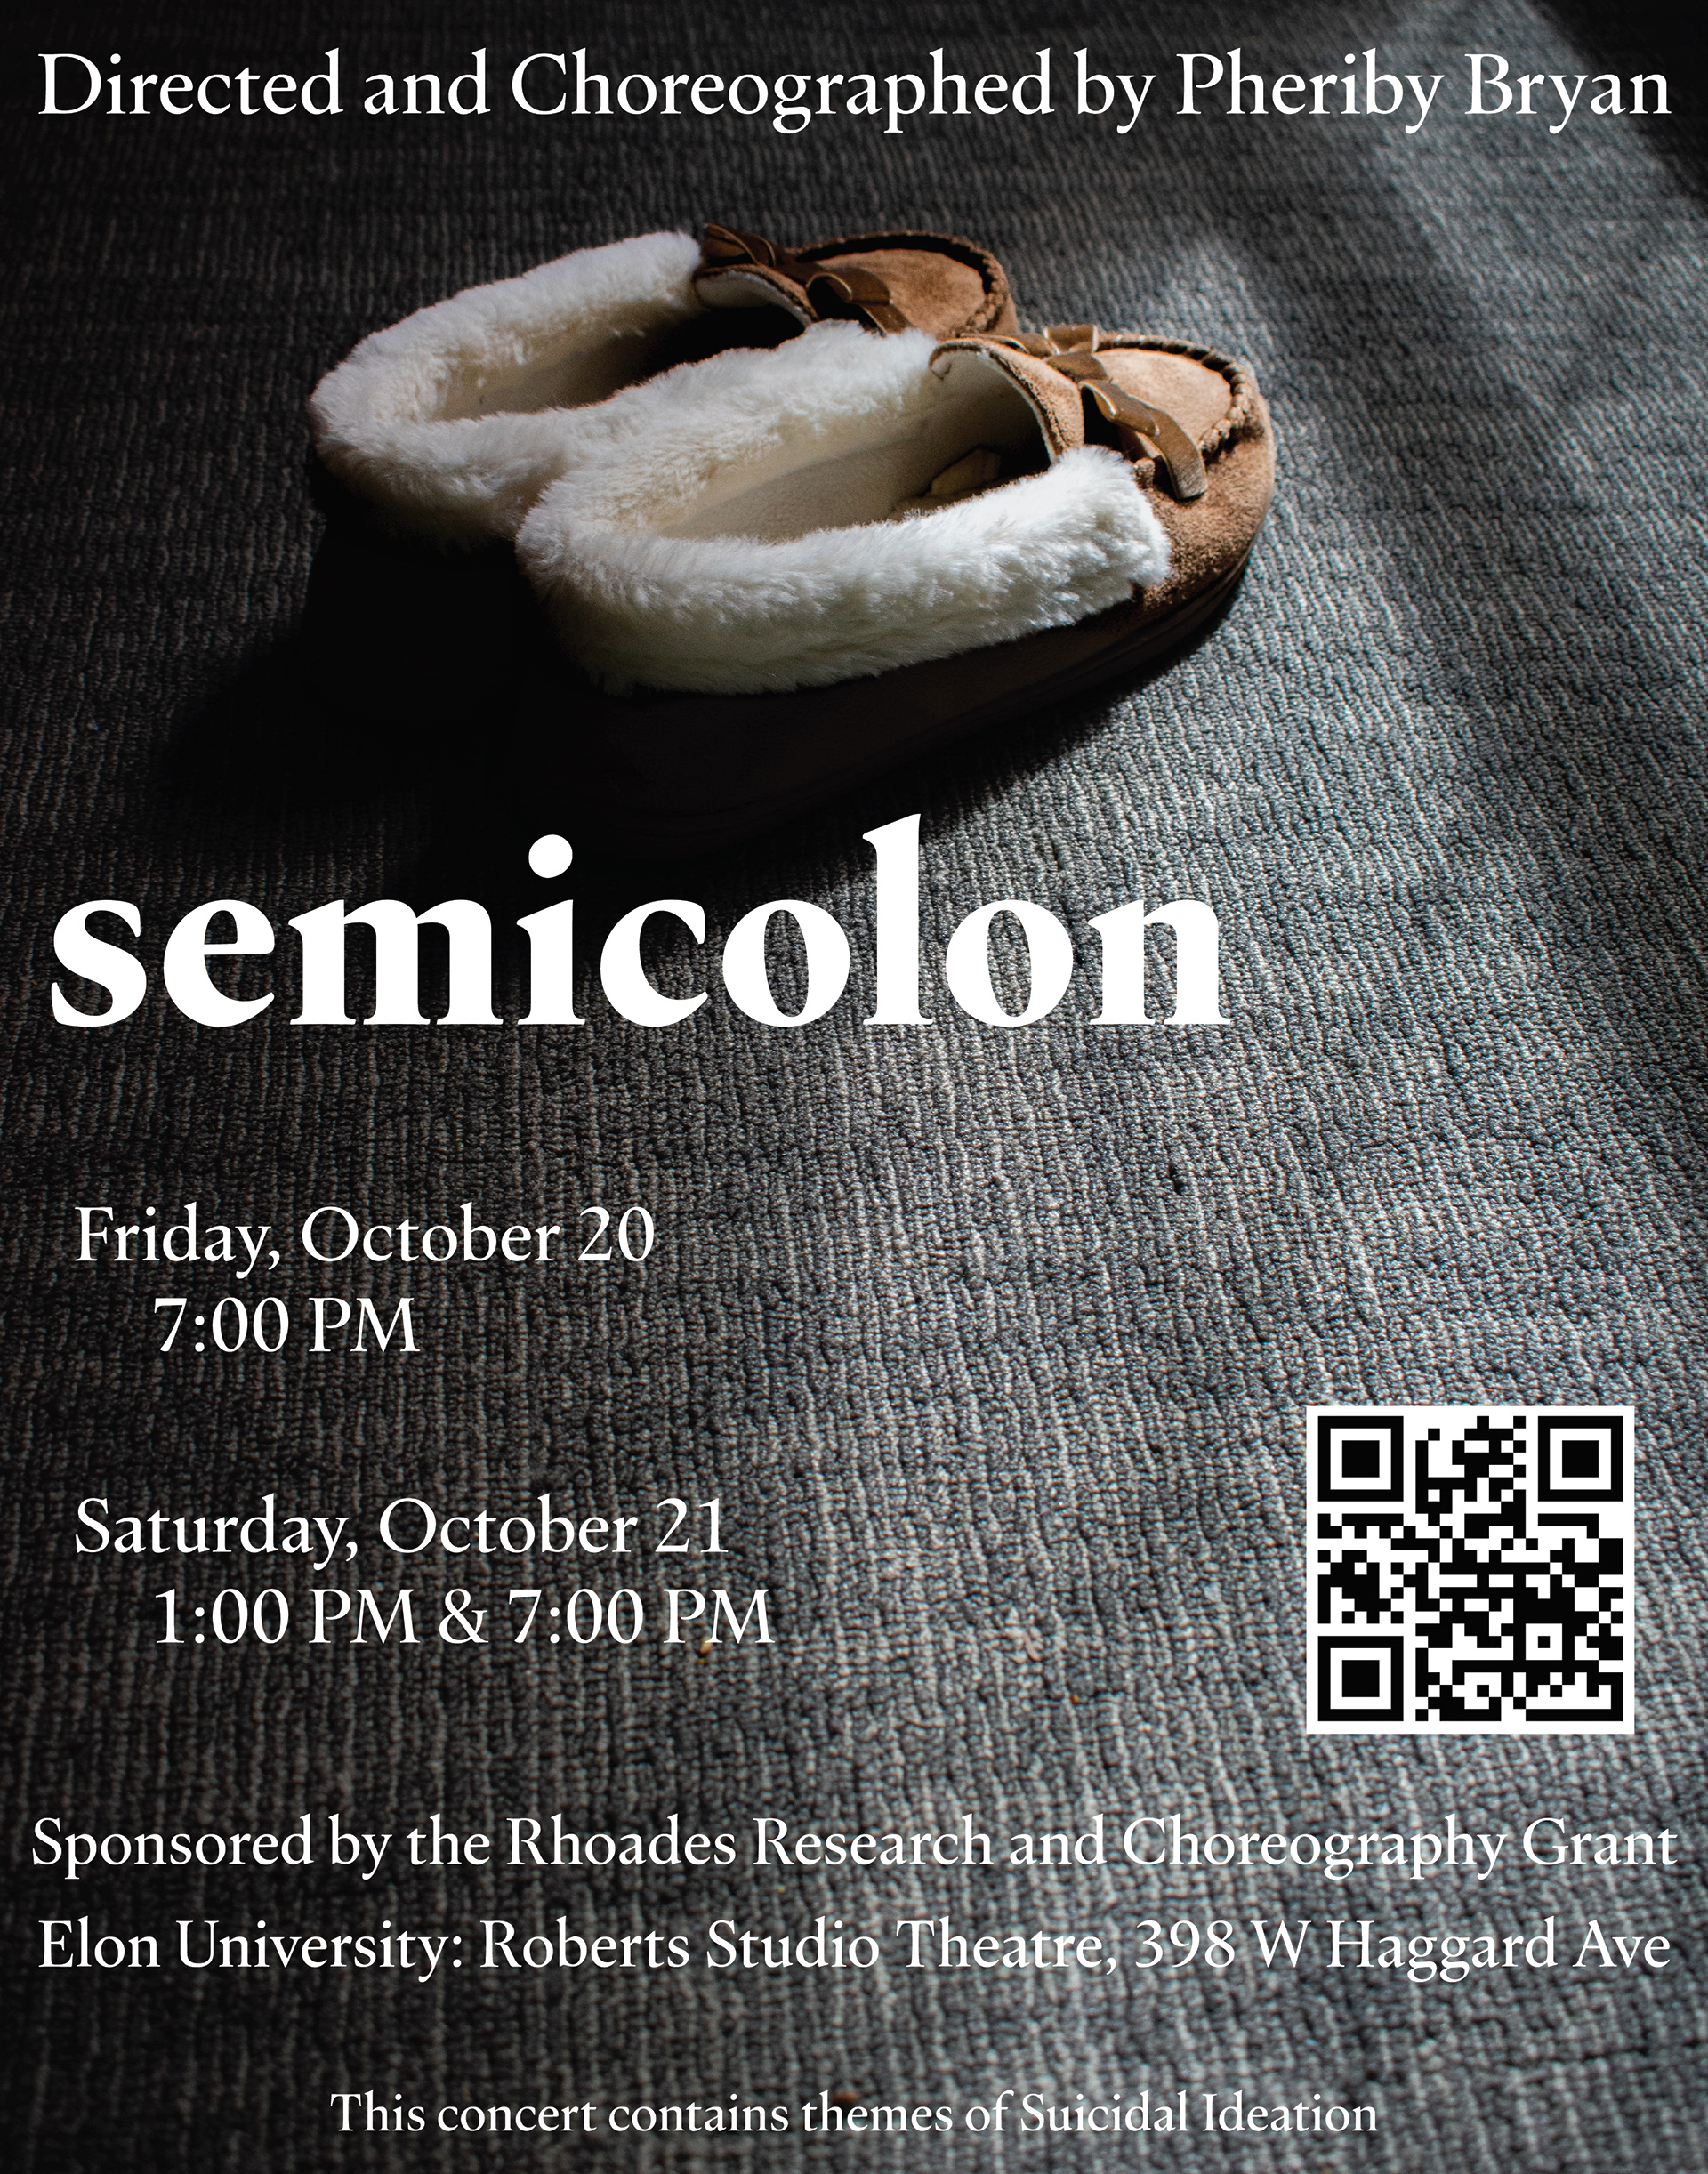 Semicolon poster showing a pair of slippers on a gray carpet